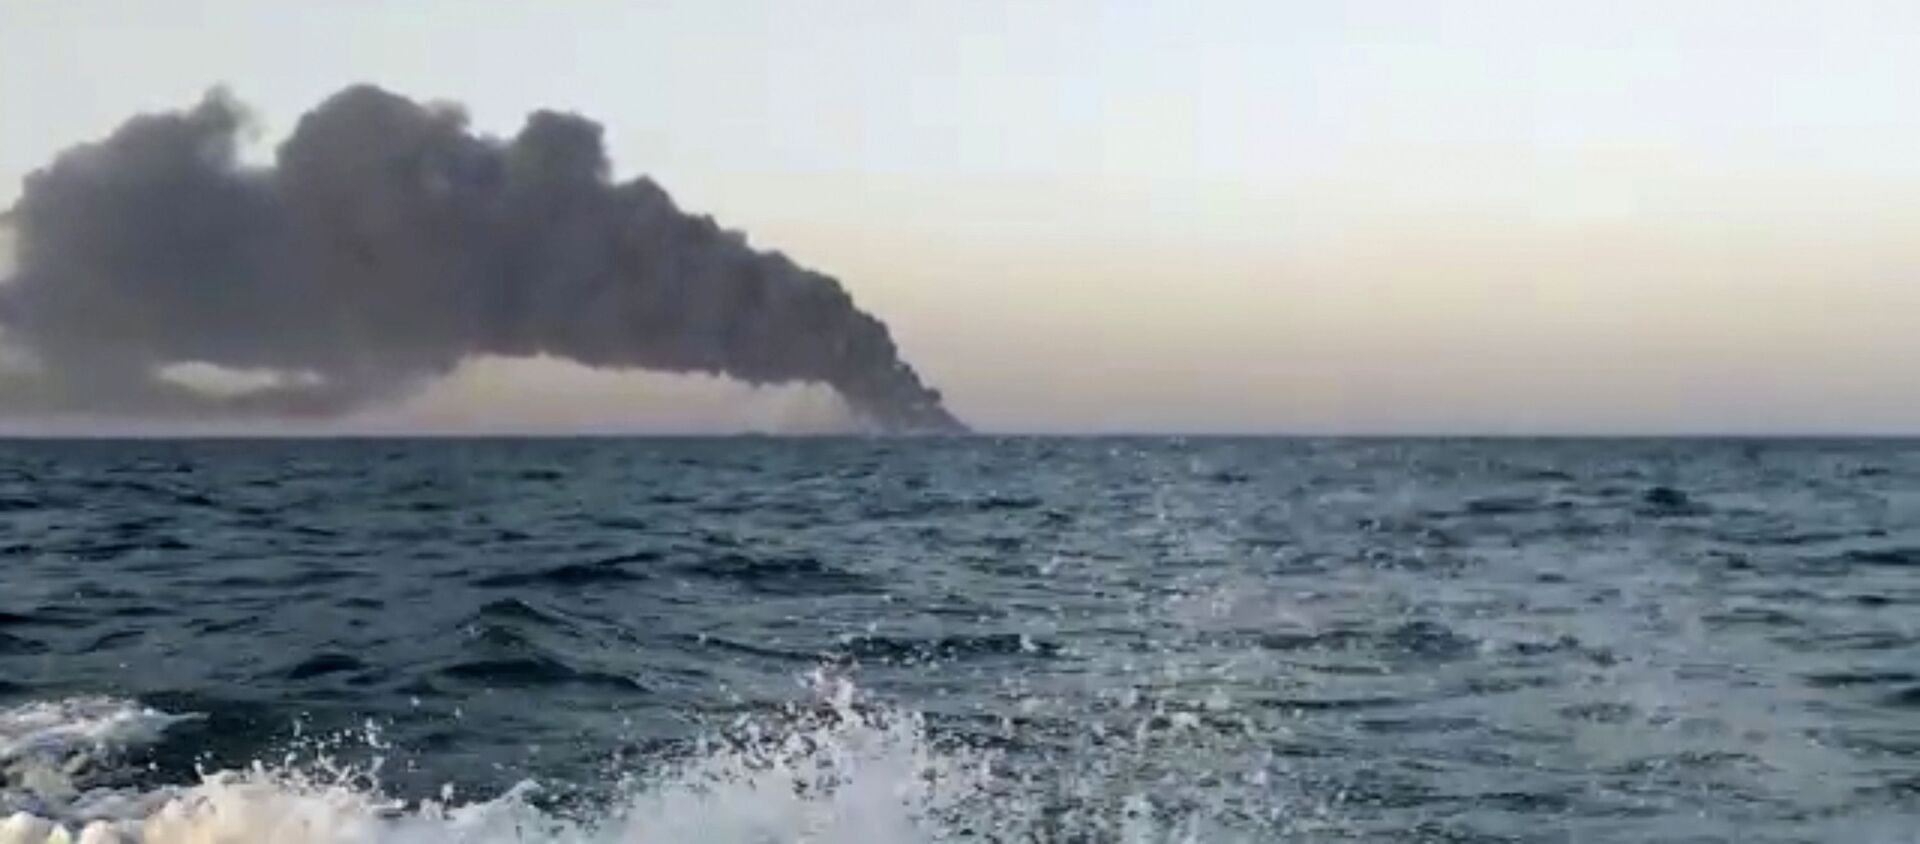 This image made from a video released on Wednesday, June 2, 2021 by Asriran.com, shows smoke rising from Iran's navy support ship Kharg in the Gulf of Oman - Sputnik International, 1920, 02.06.2021